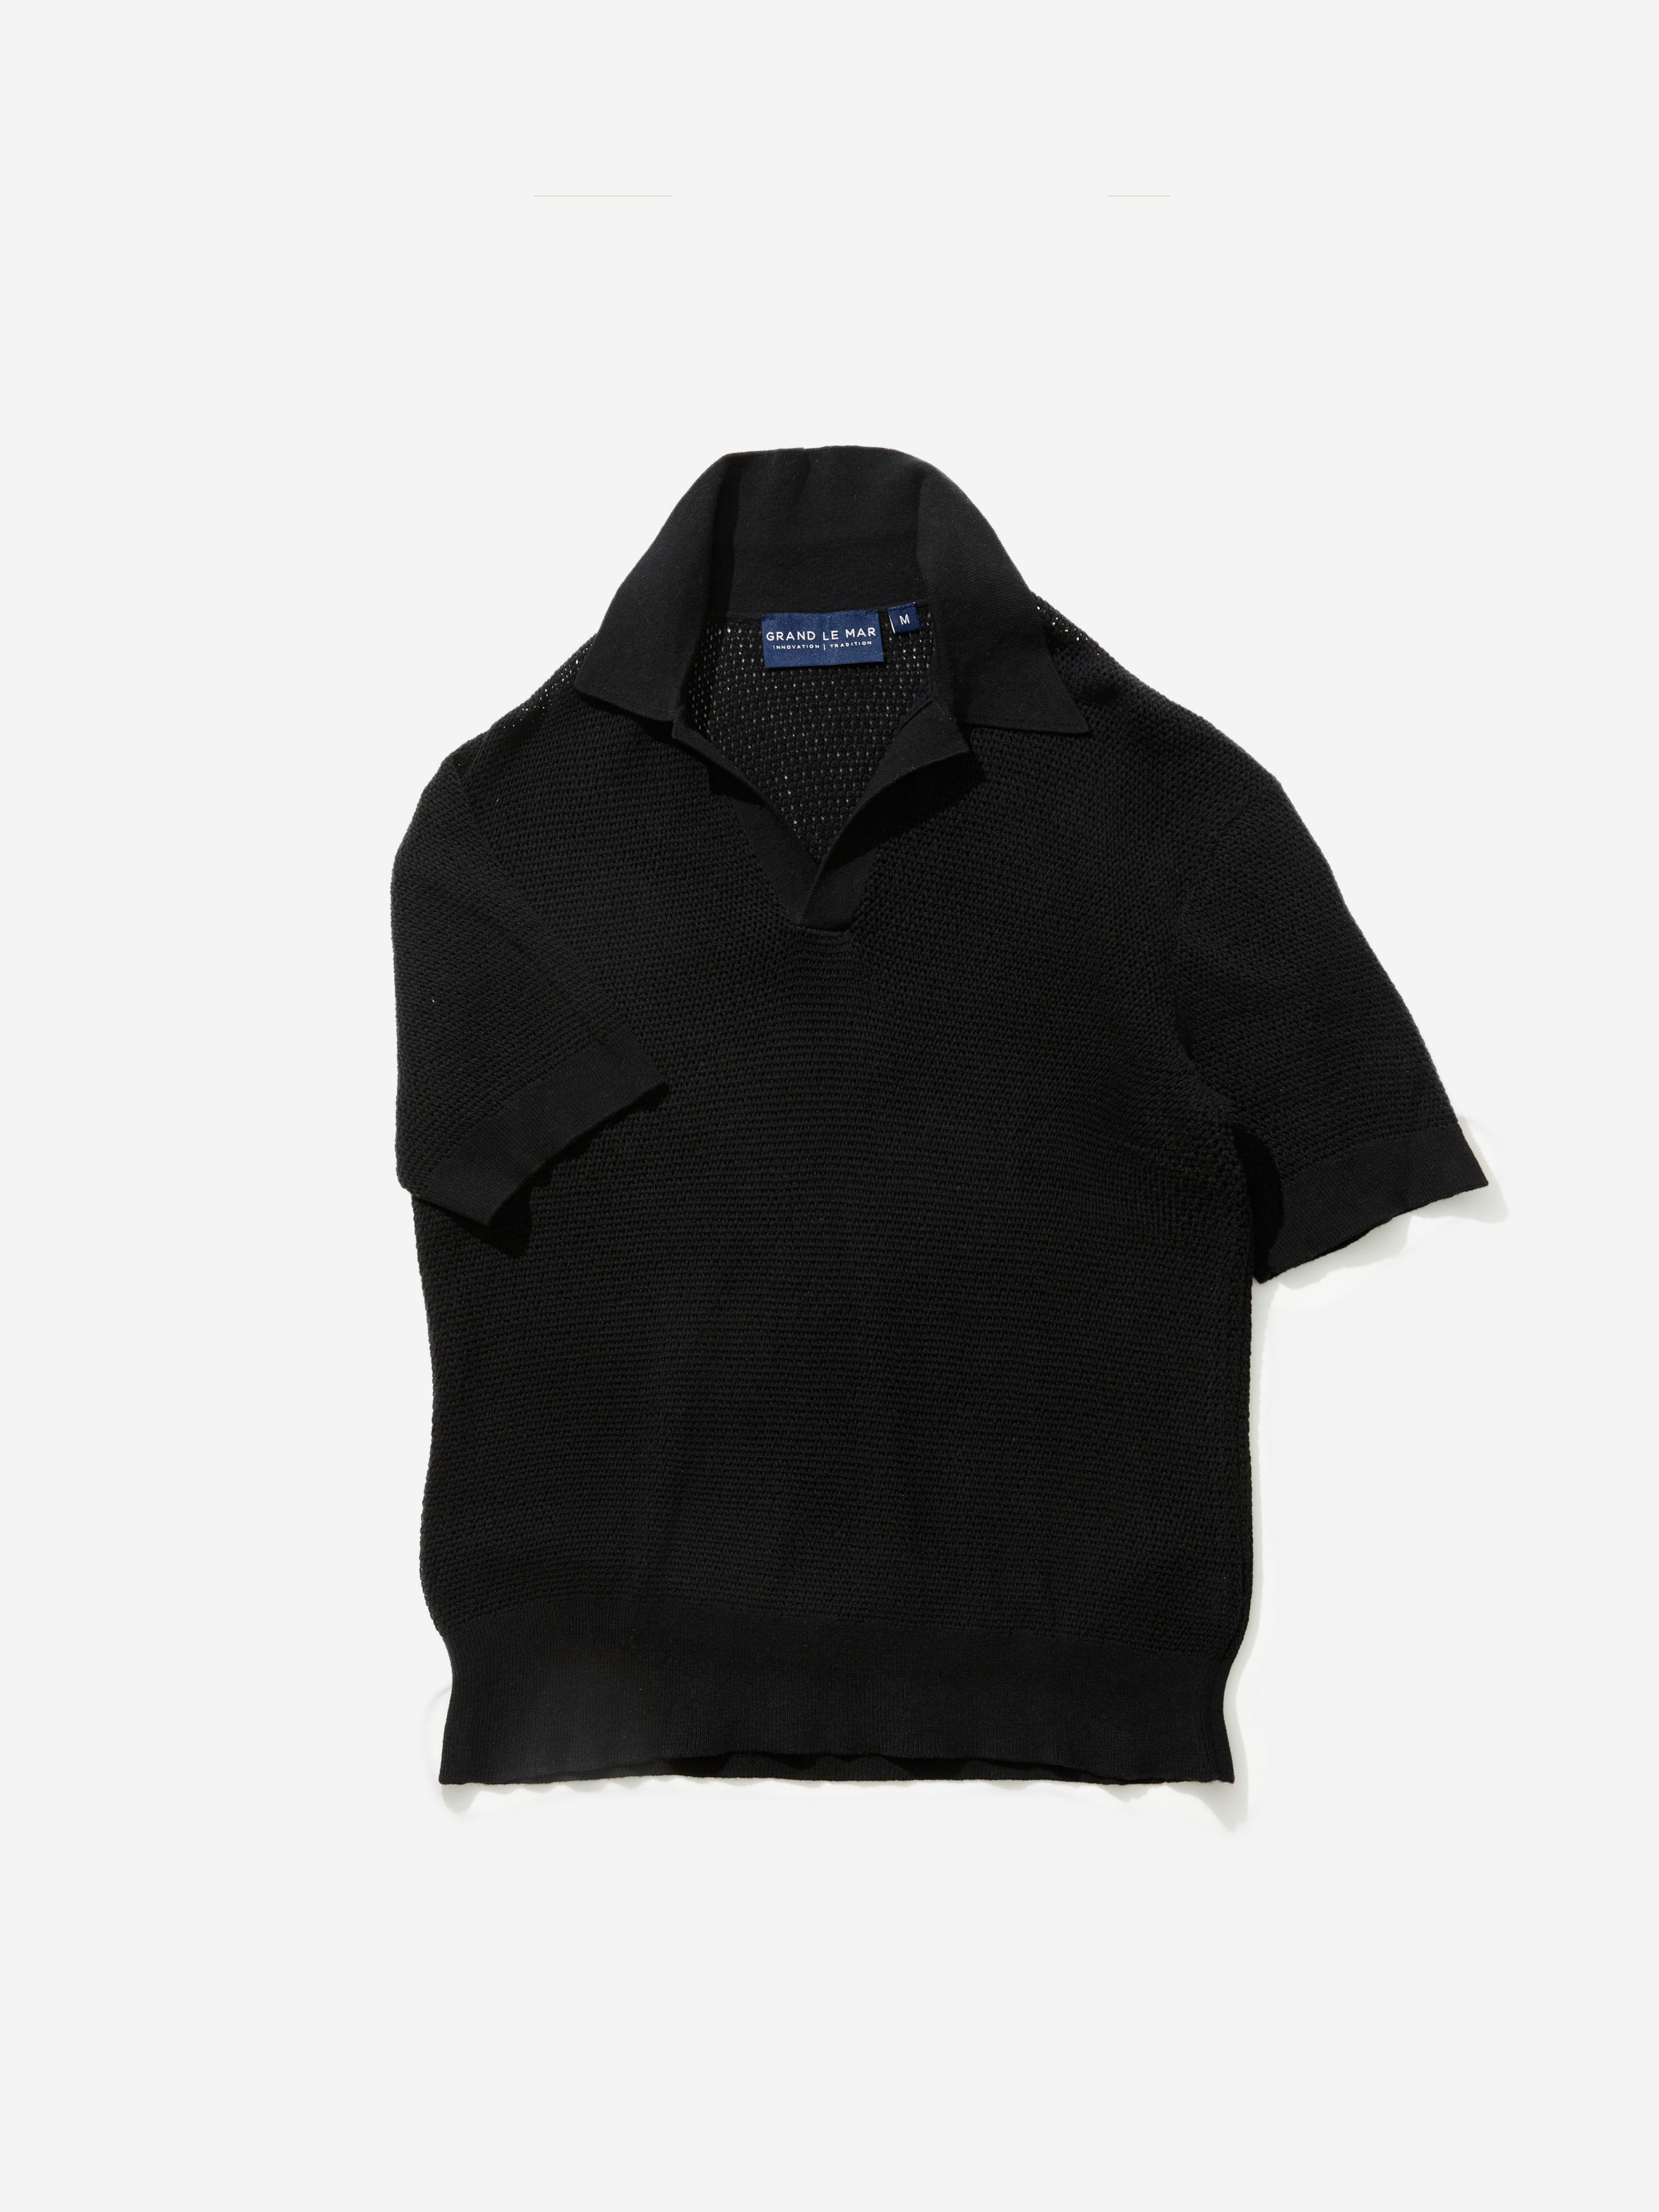 Black Knitted Short Sleeve Jersey - Grand Le Mar